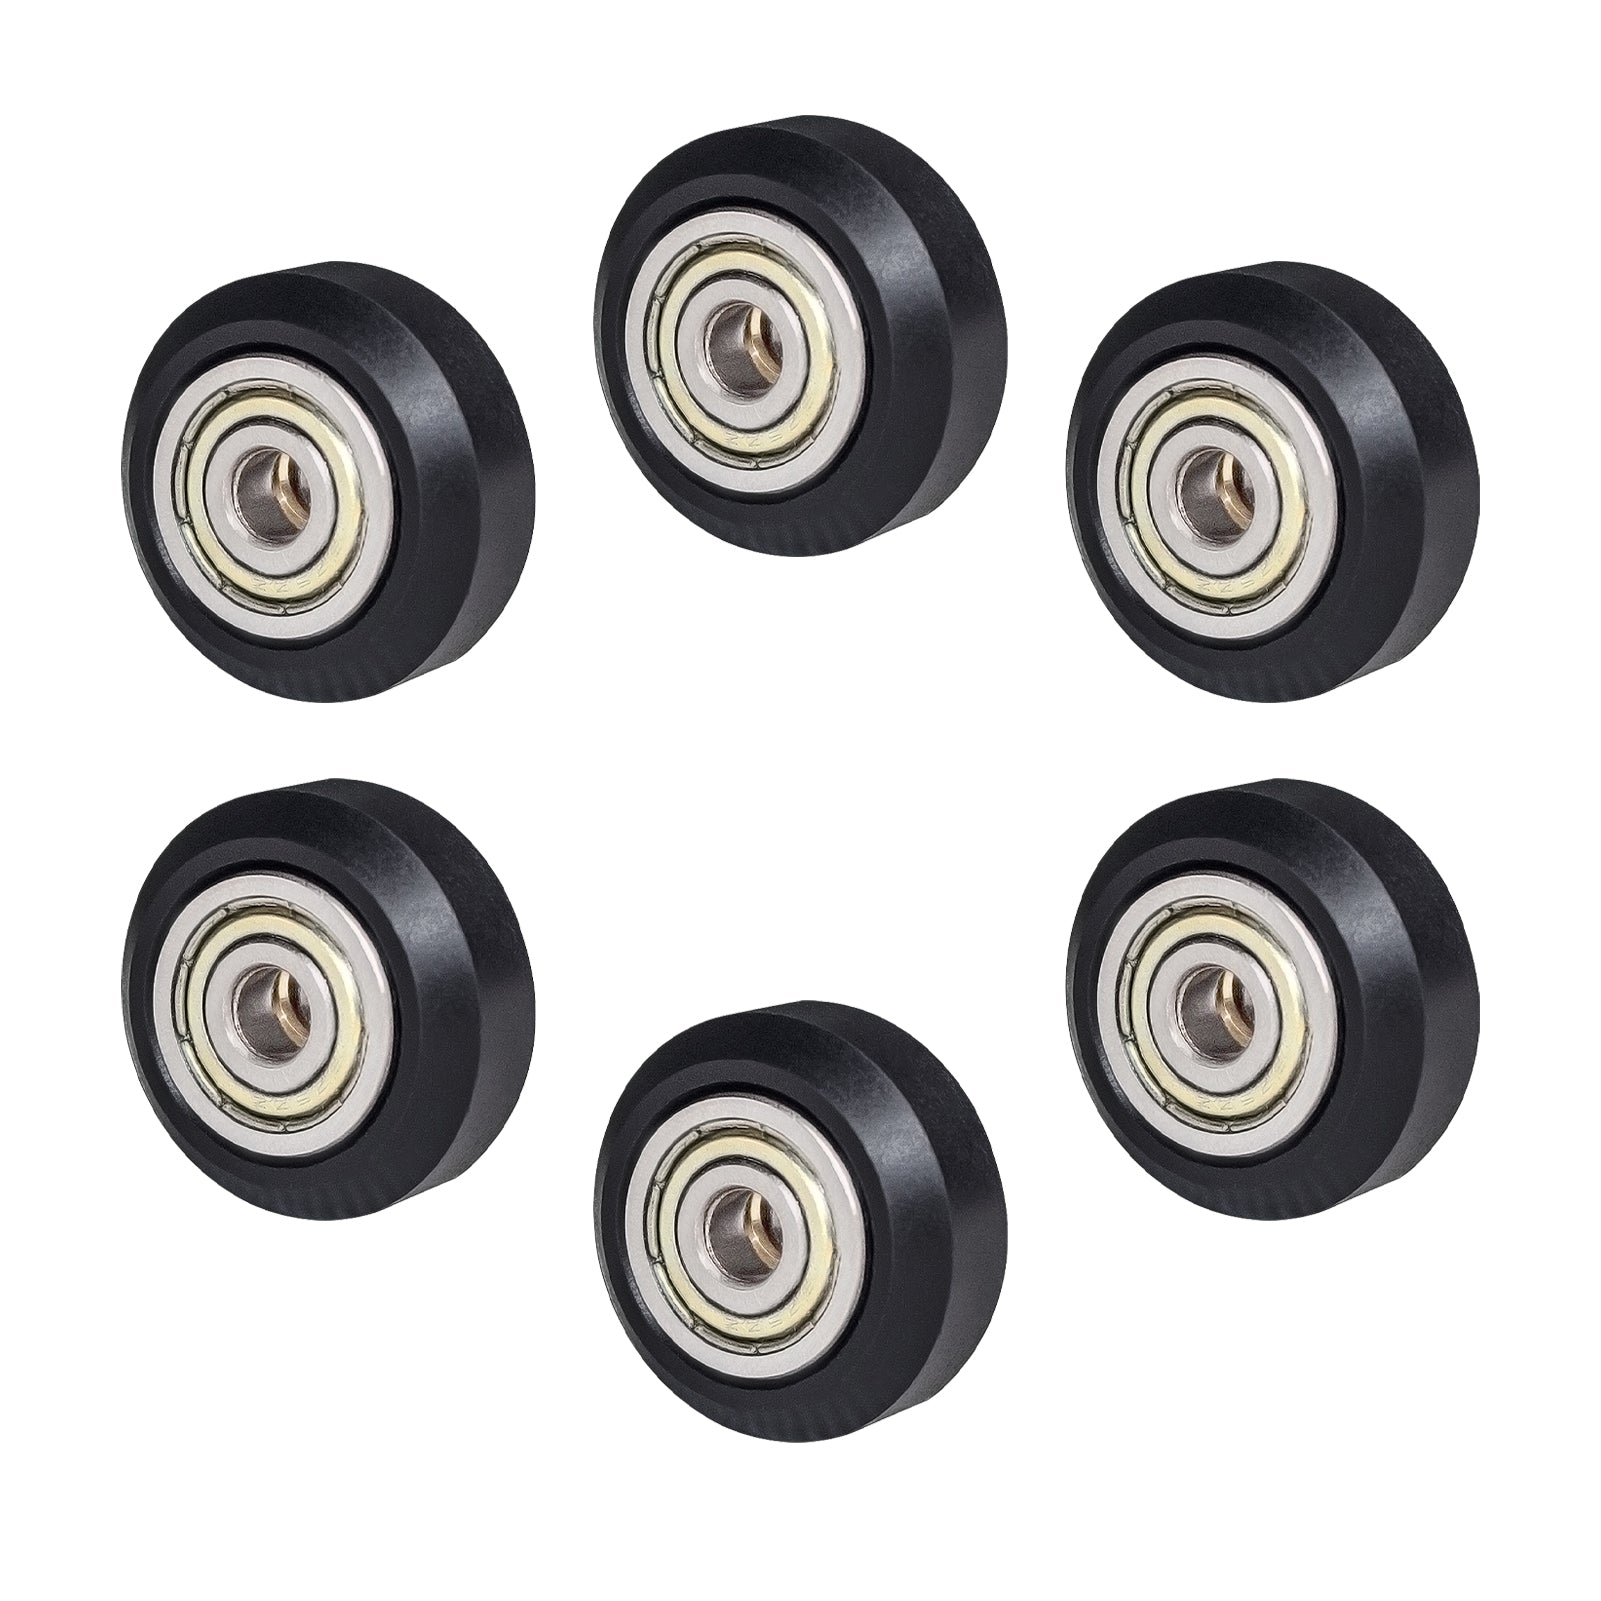 POM Pulley Wheel 625zz idler pulley gear 20pcs 3D Printer Parts Compatible with Creality Ender 3 CR-10 CR-10S